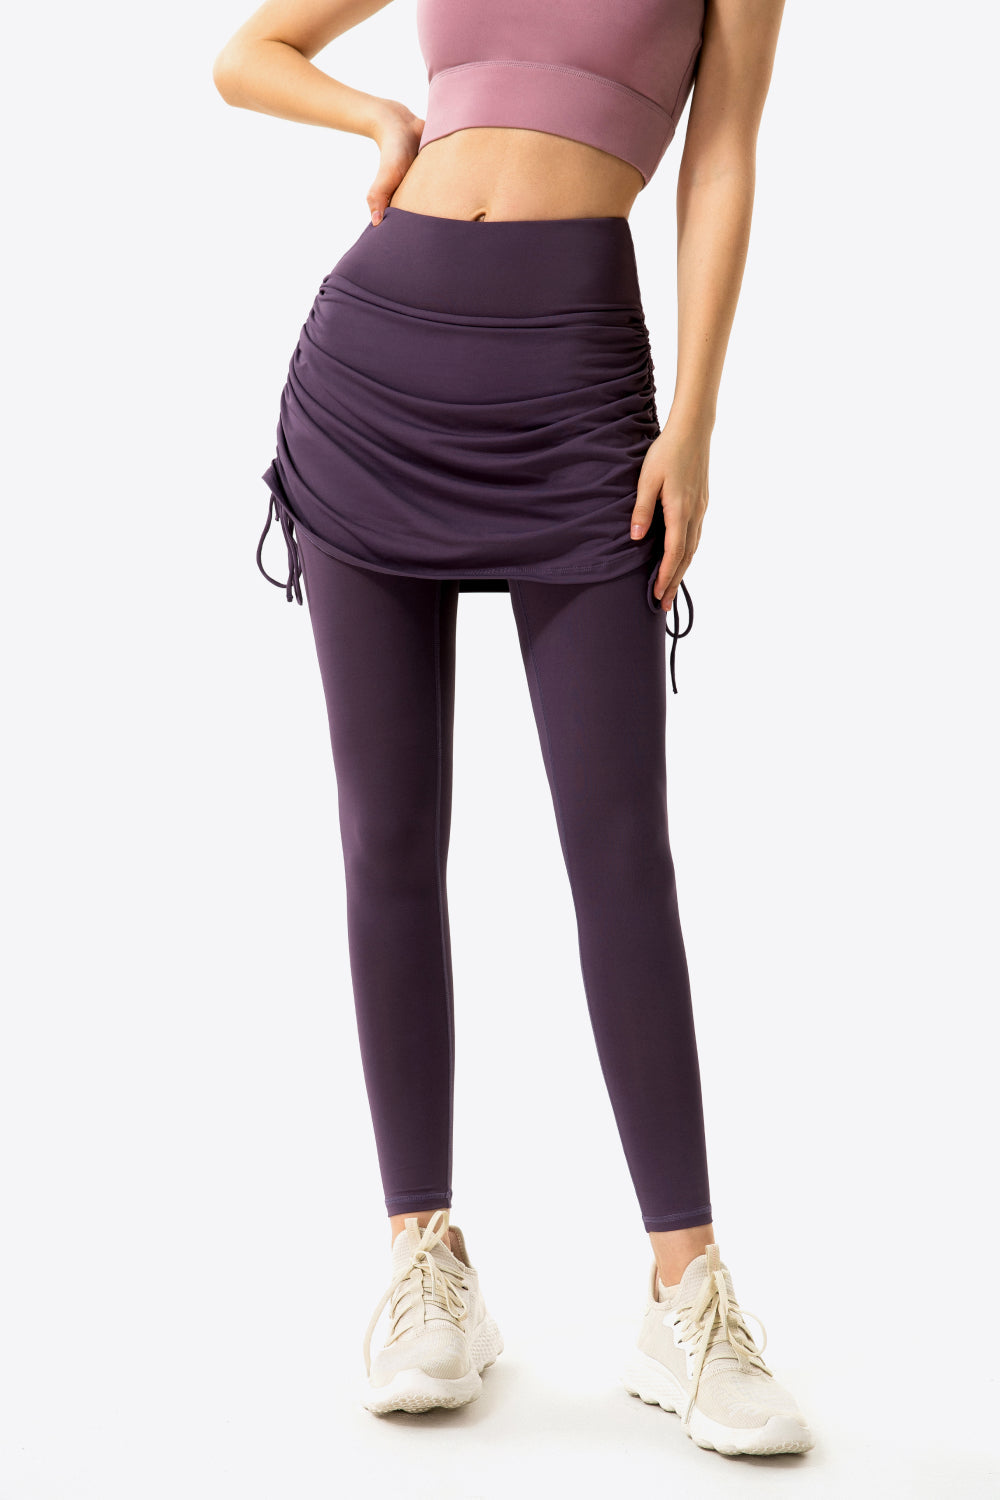 Drawstring Ruched Faux Layered Yoga Leggings - Purple / S - Women’s Clothing & Accessories - Pants - 21 - 2024